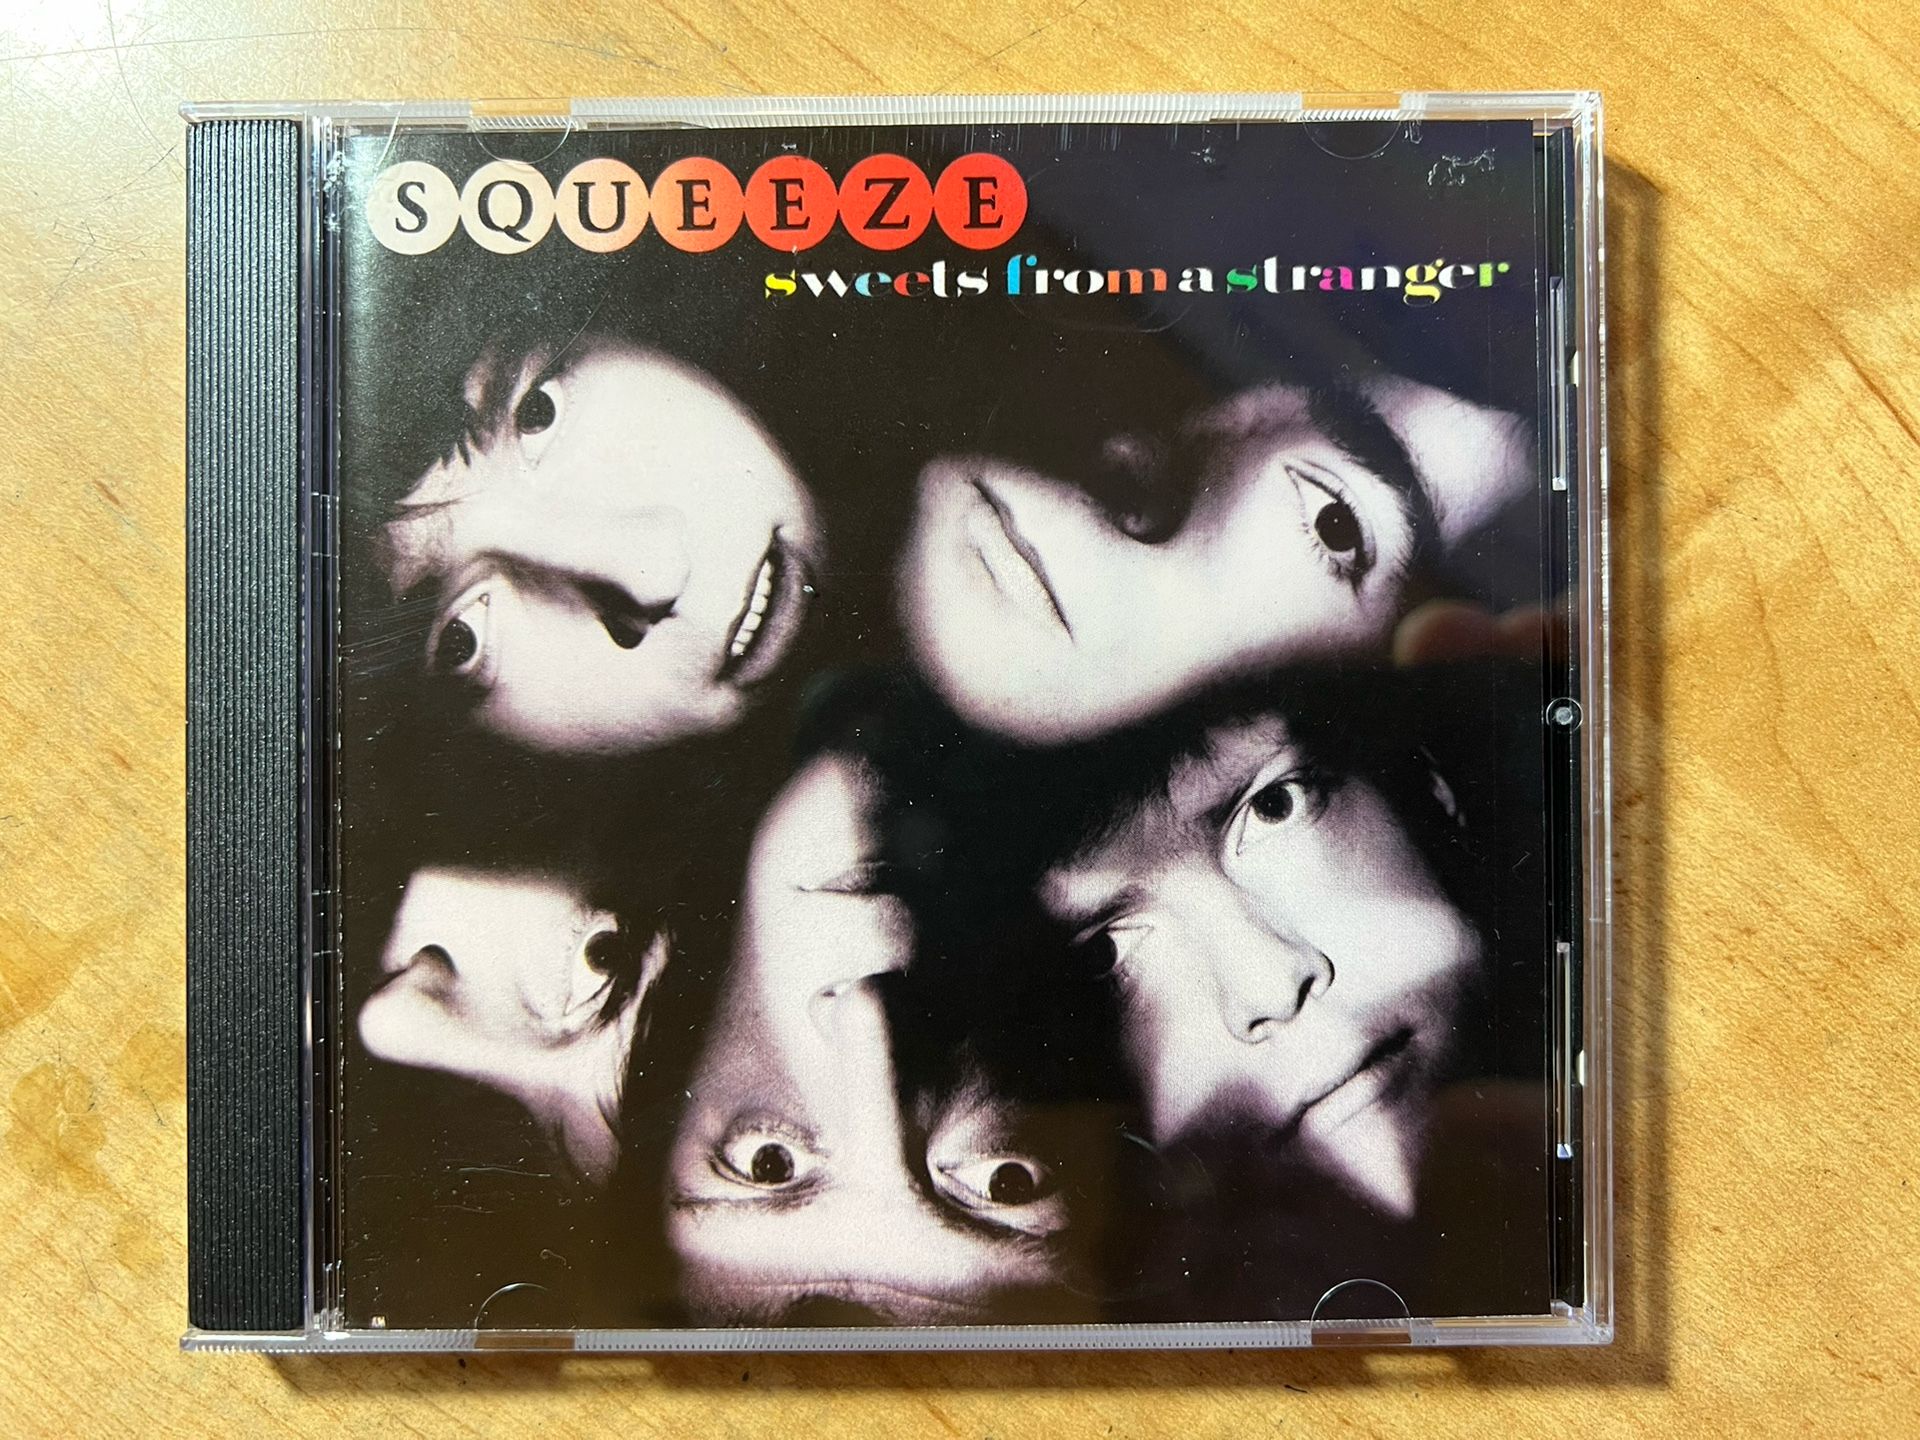 Sweets From A Stranger By SQUEEZE (CD, 1987, A&M Records) ** MINT ** 